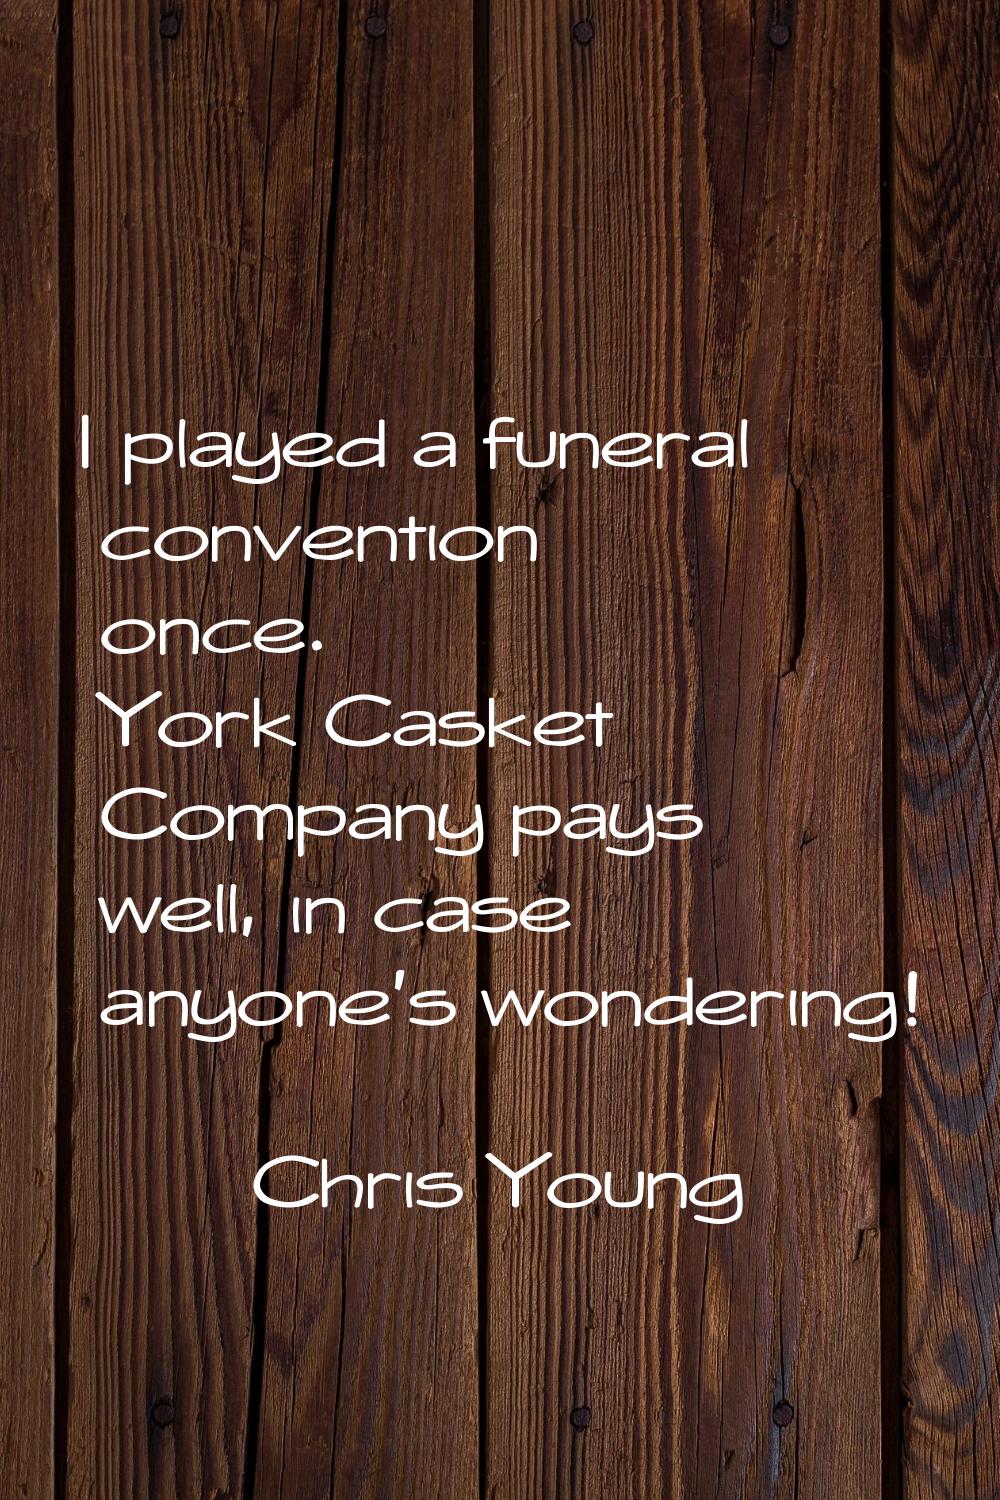 I played a funeral convention once. York Casket Company pays well, in case anyone's wondering!